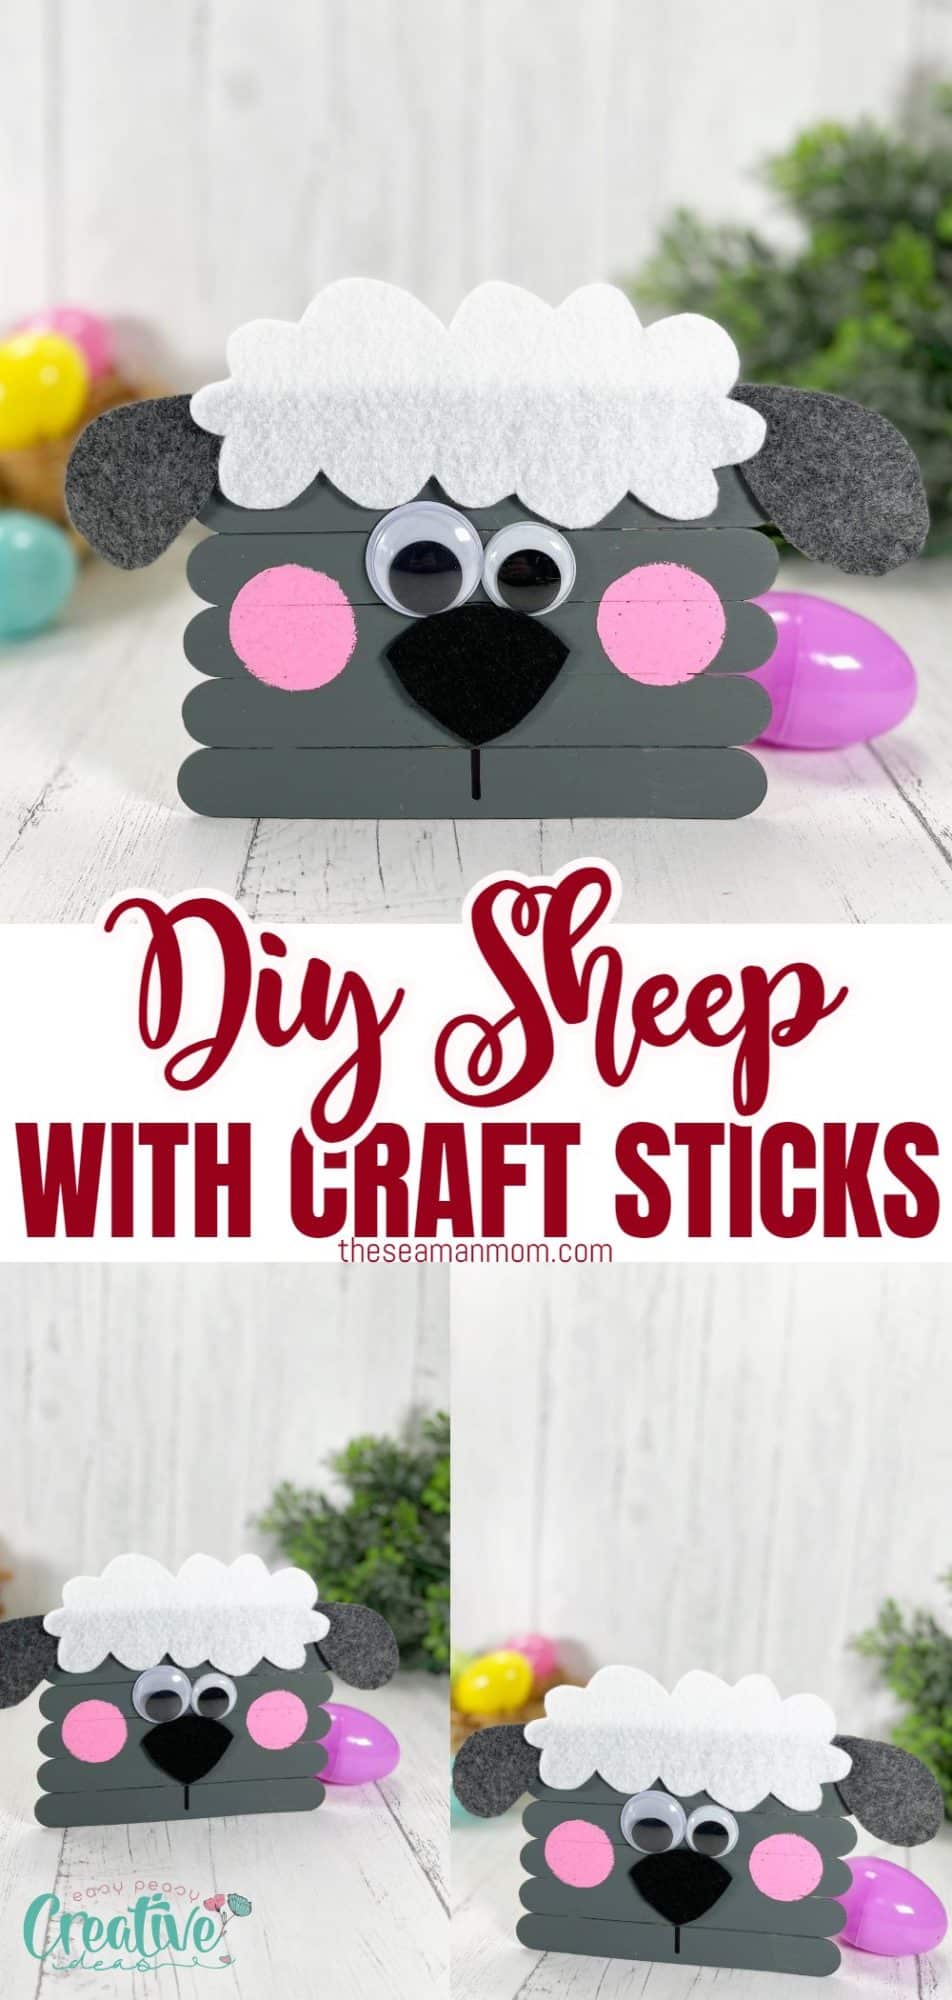 Sheep craft for Easter with craft sticks